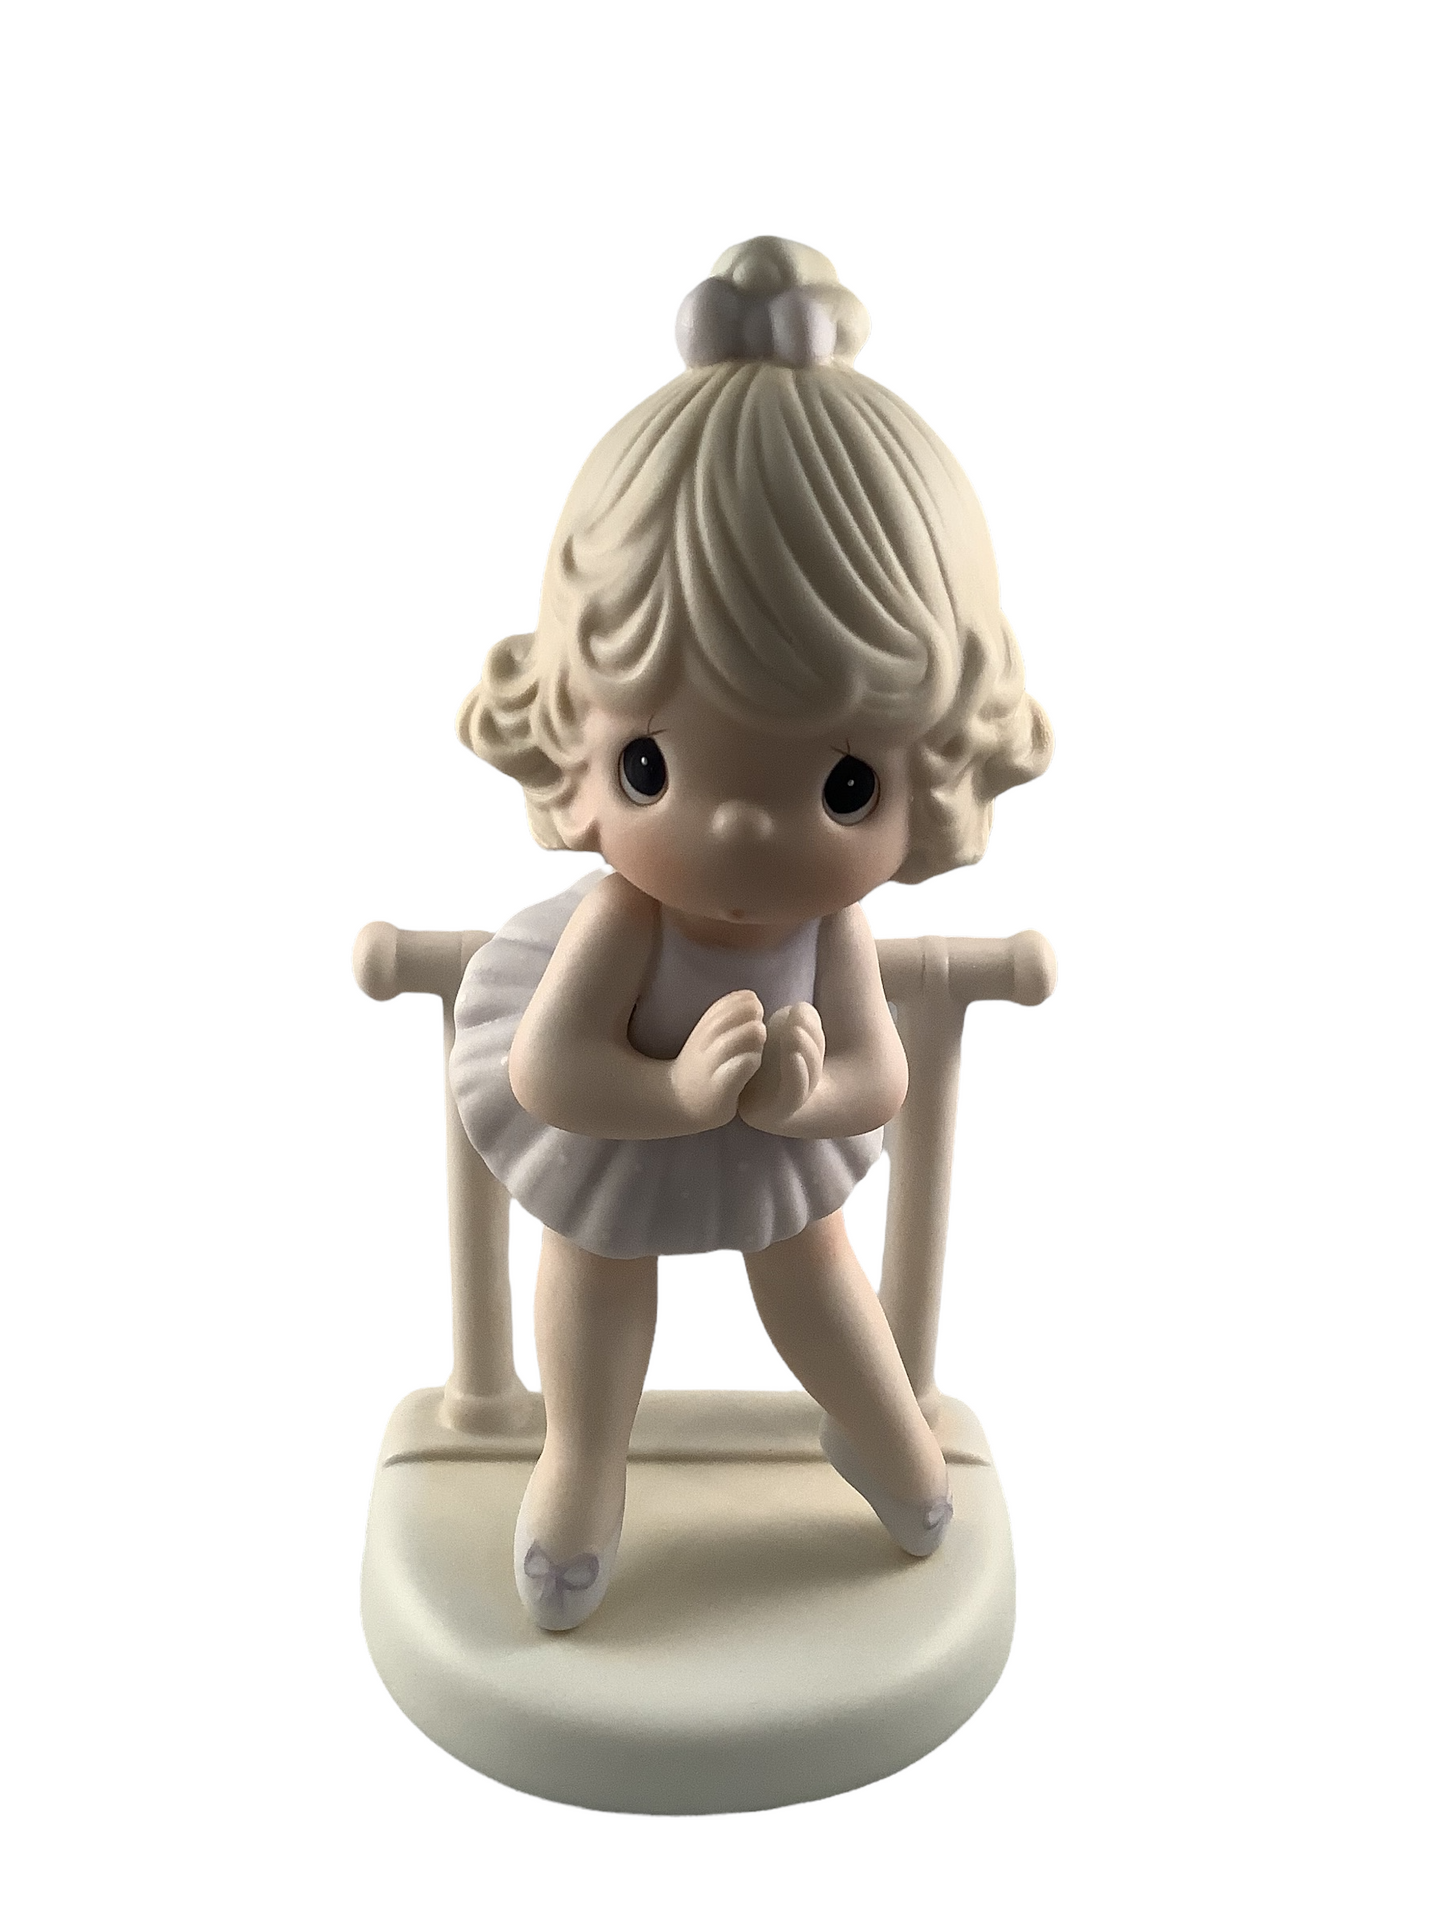 Lord Keep Me On My Toes - Precious Moments Porcelain Figurine